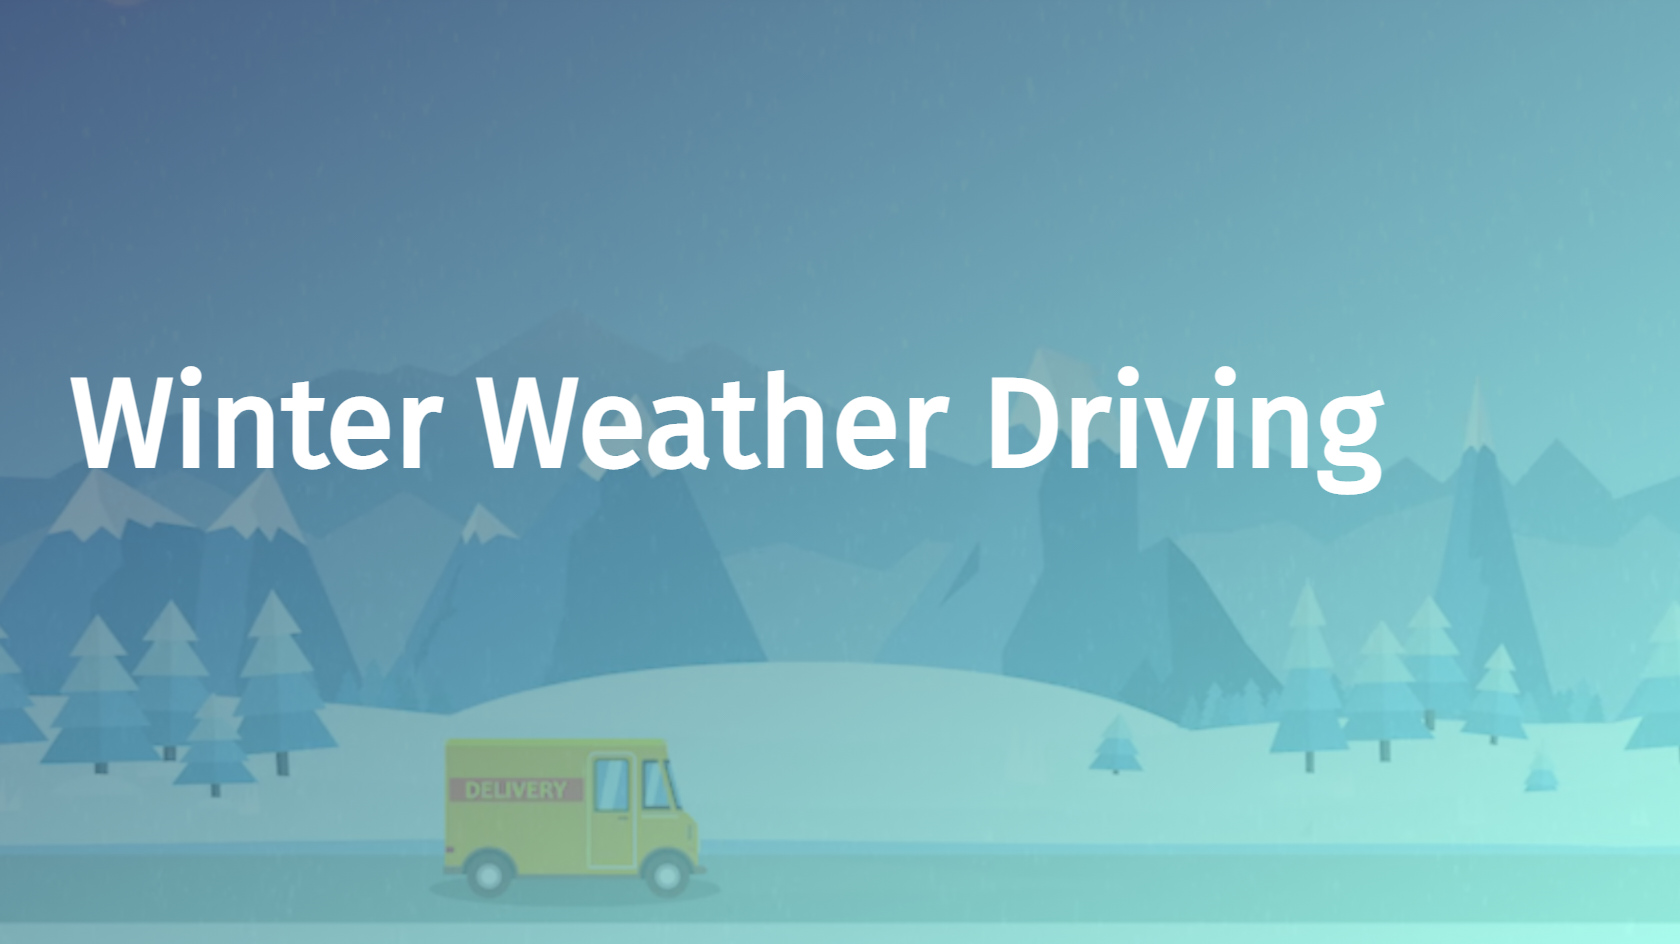 Winter Weather Driving